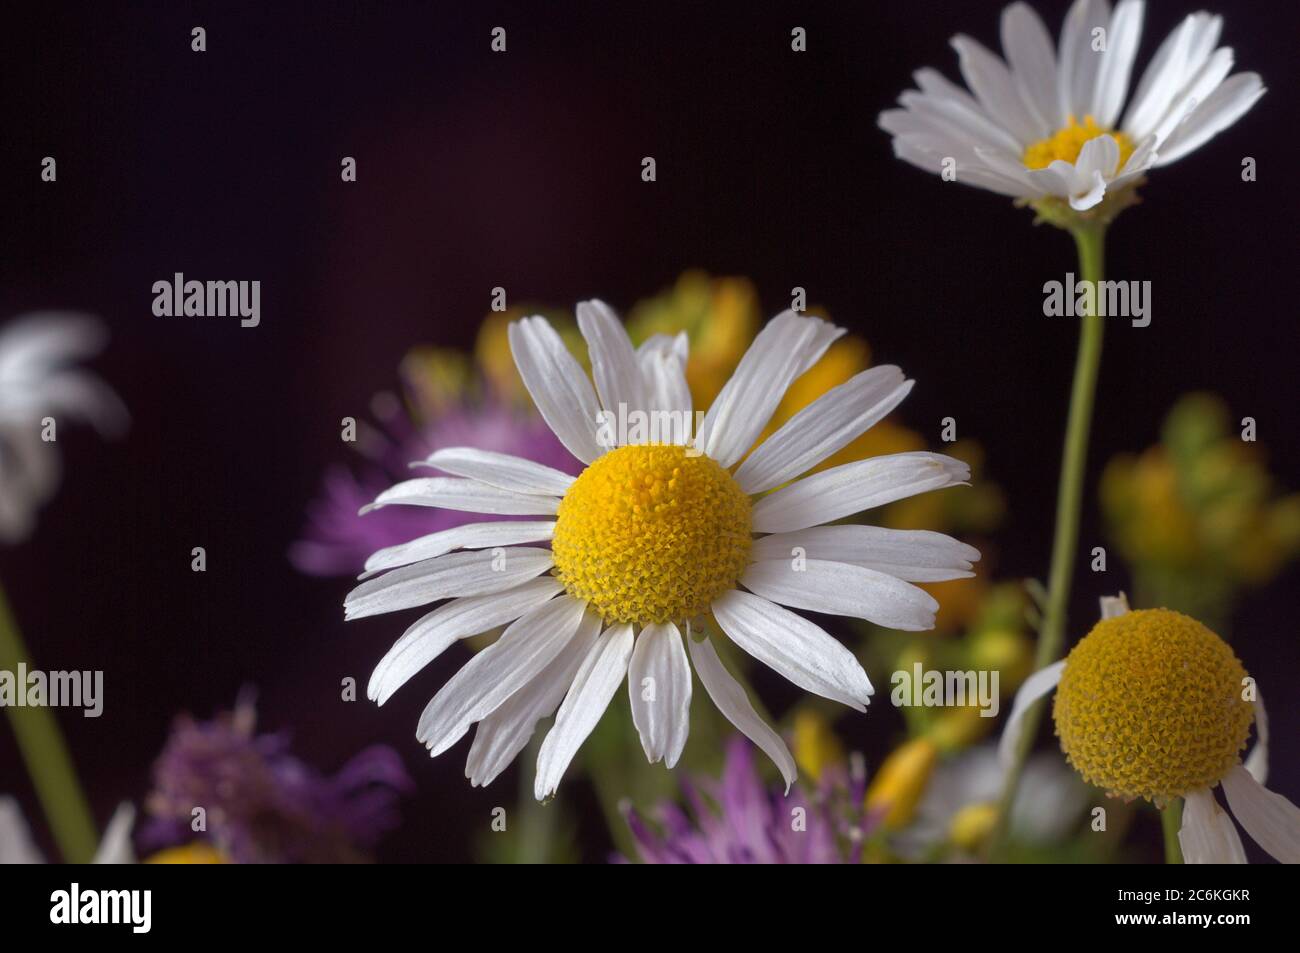 colorful bouquet of wild grasses and flowers in a small vase on a black background,Leucanthemum vulgare Lam Stock Photo